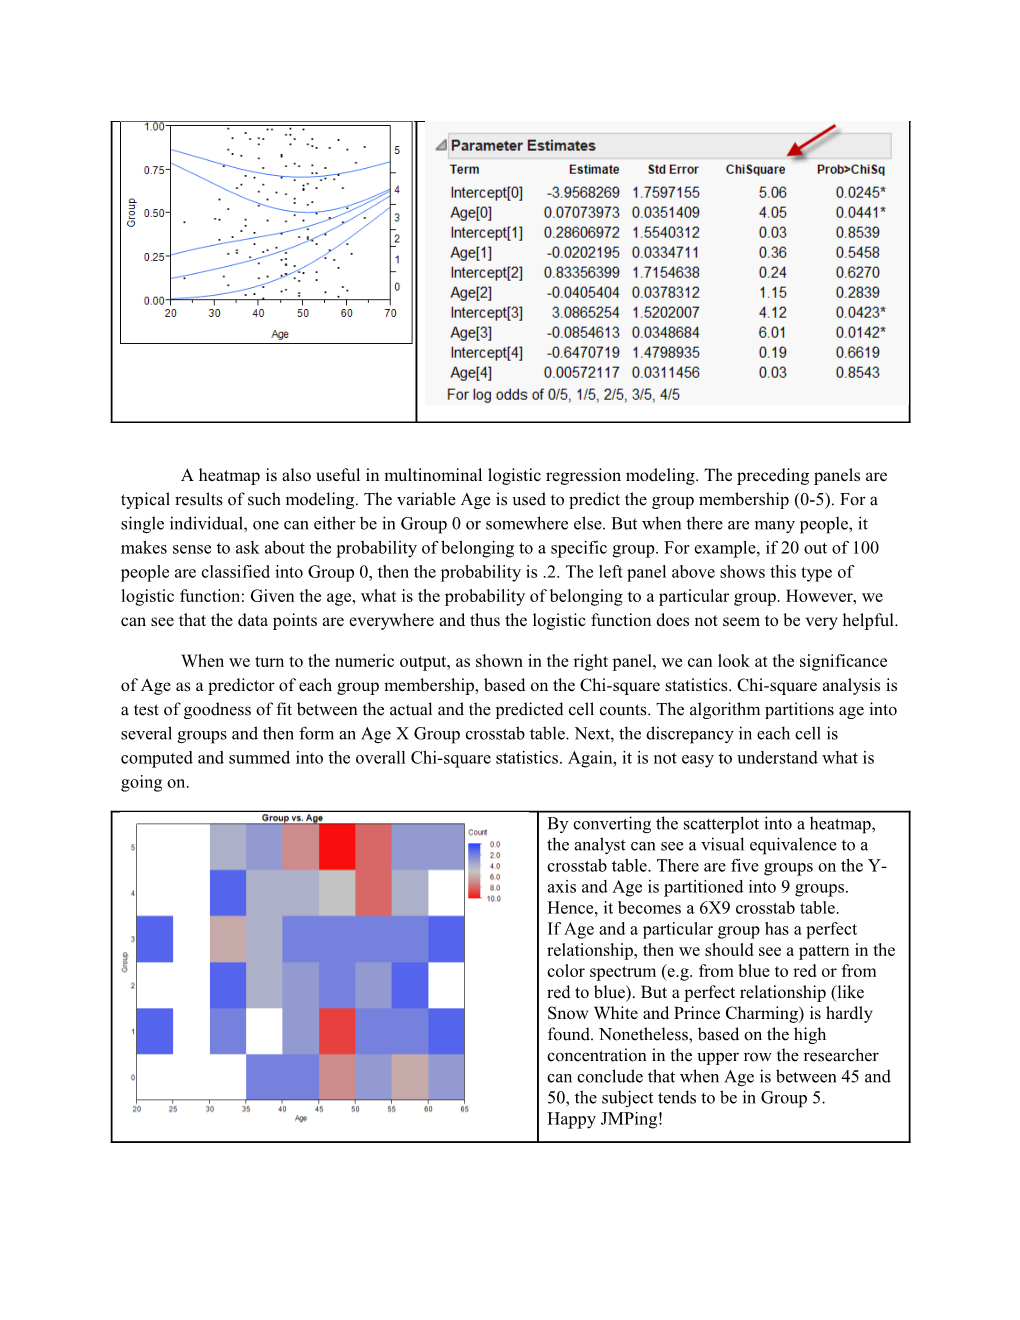 Using Heatmap to Interpret Regression Results in JMP Chong Ho Yu, Ph.D.S March 21, 2013